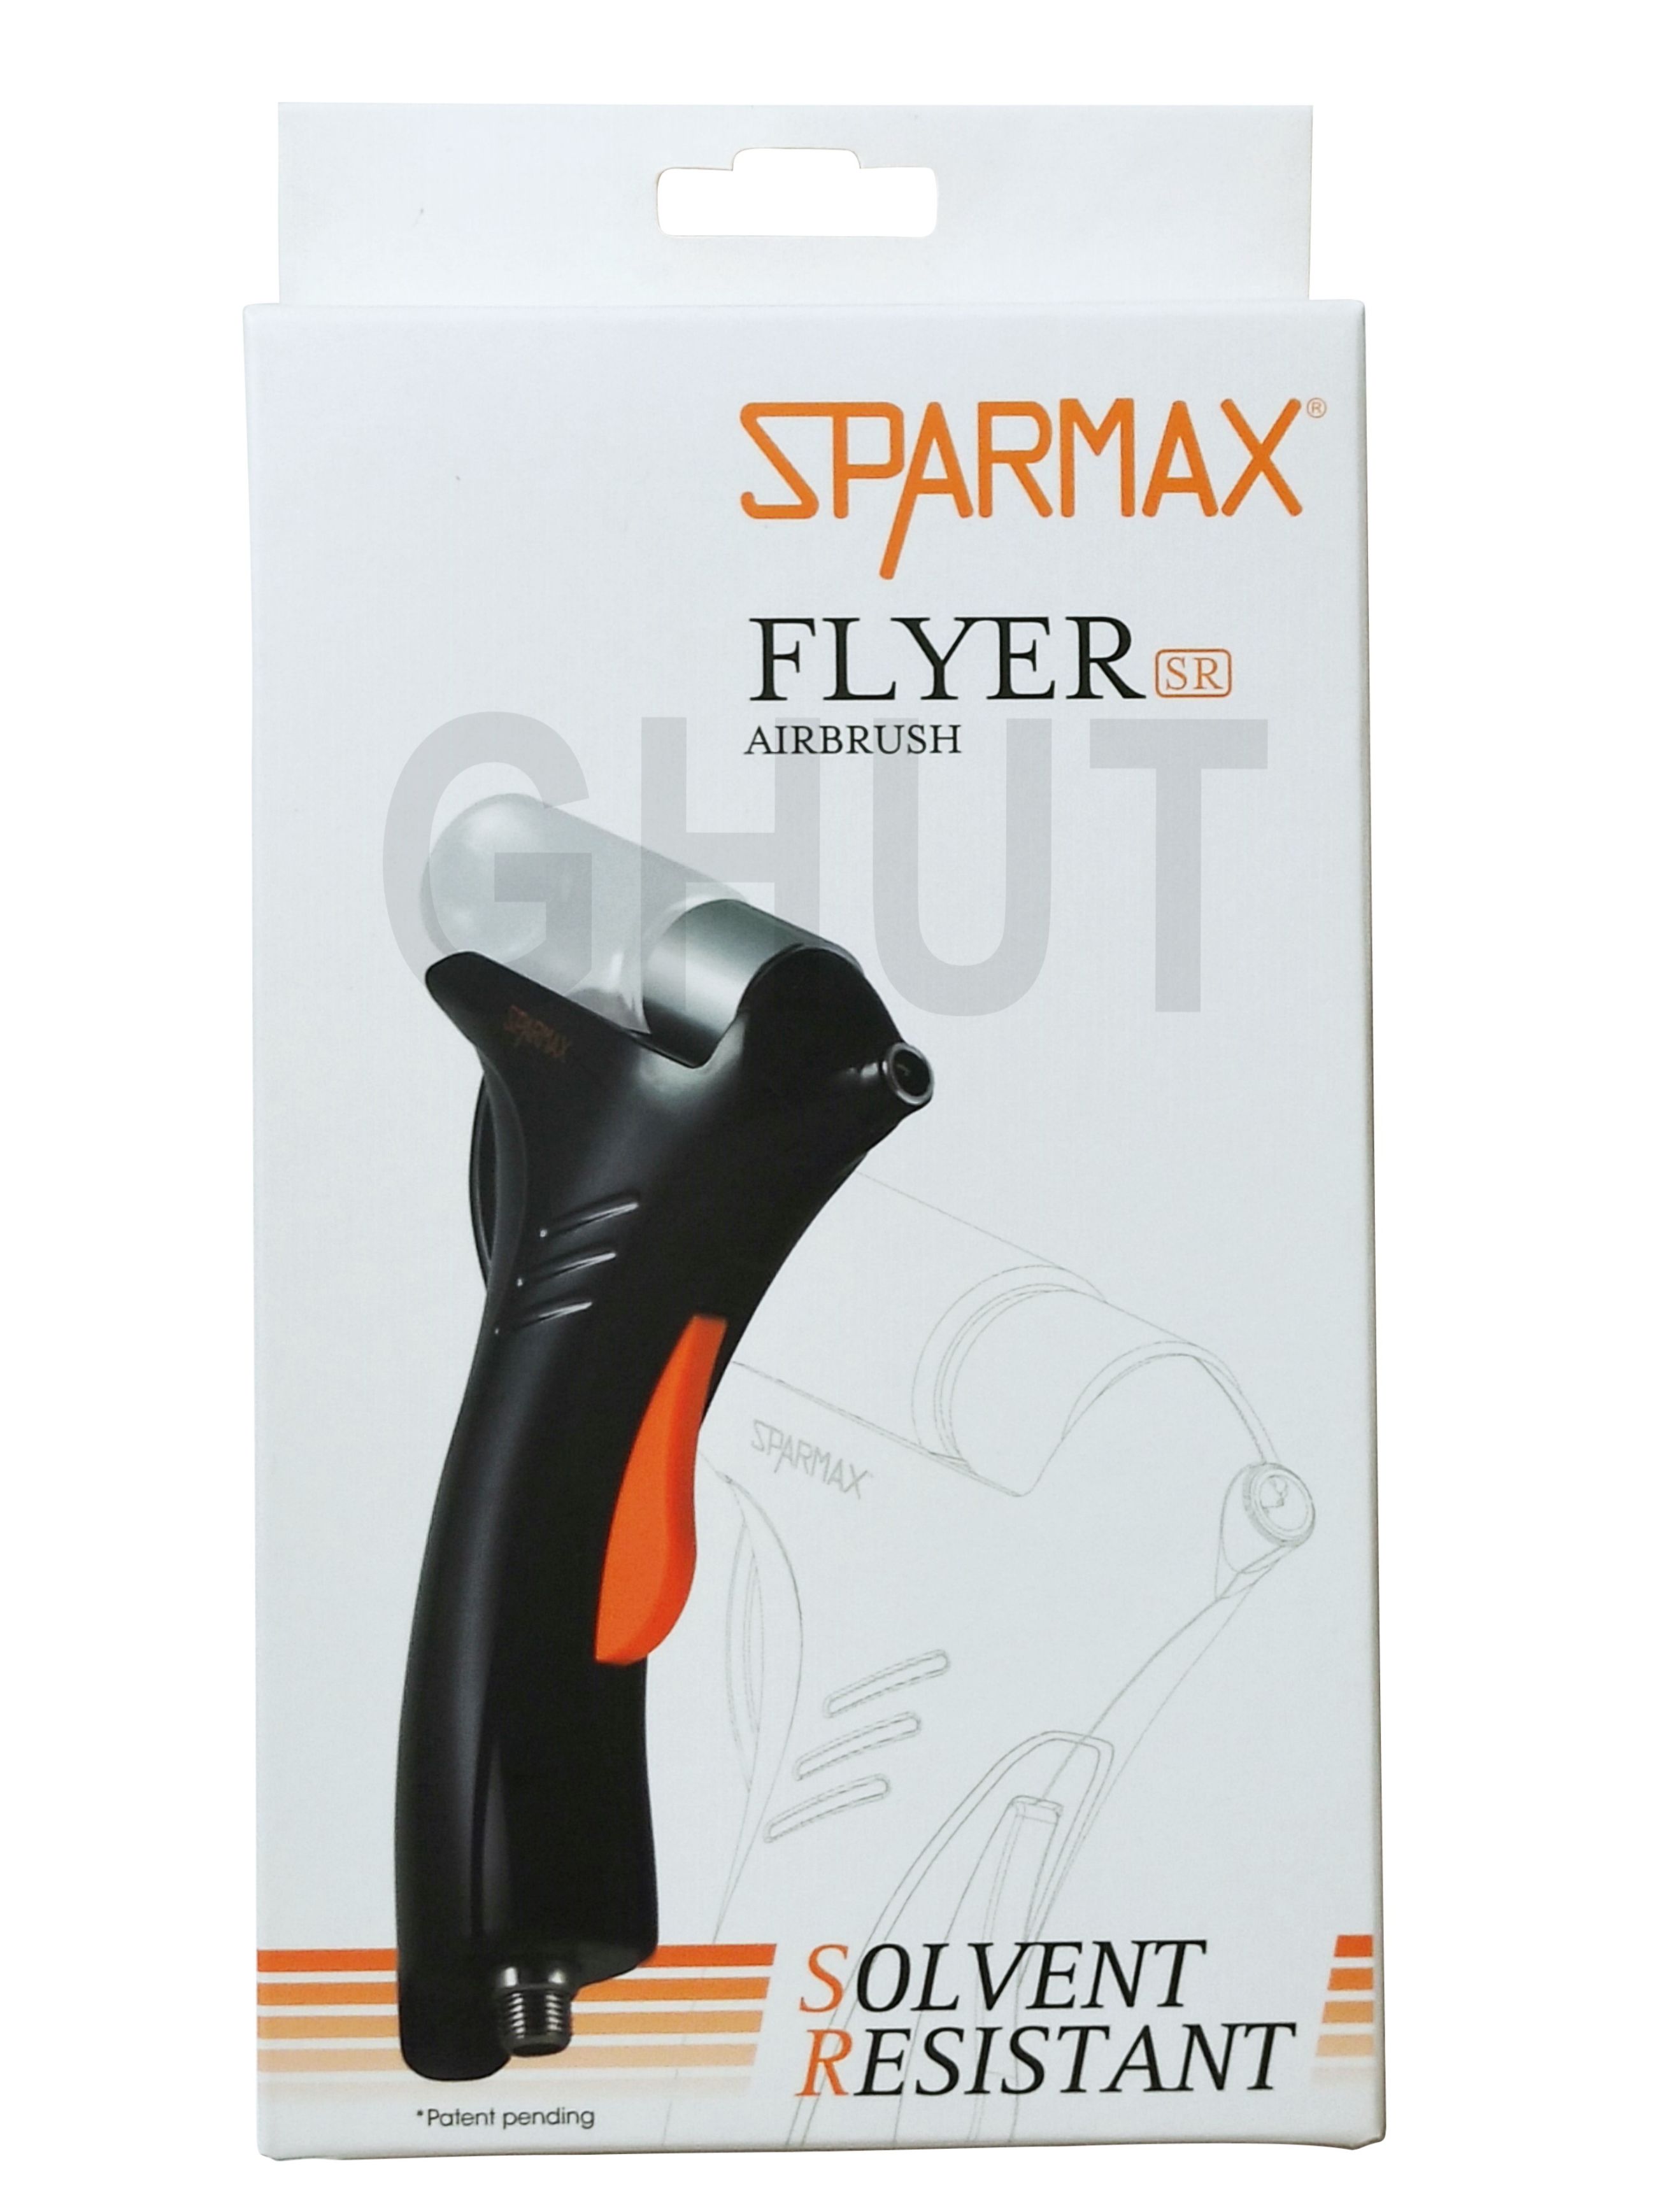 Sparmax Flyer Airbrush Accessories - Airbrush Bottles, Glass, Set